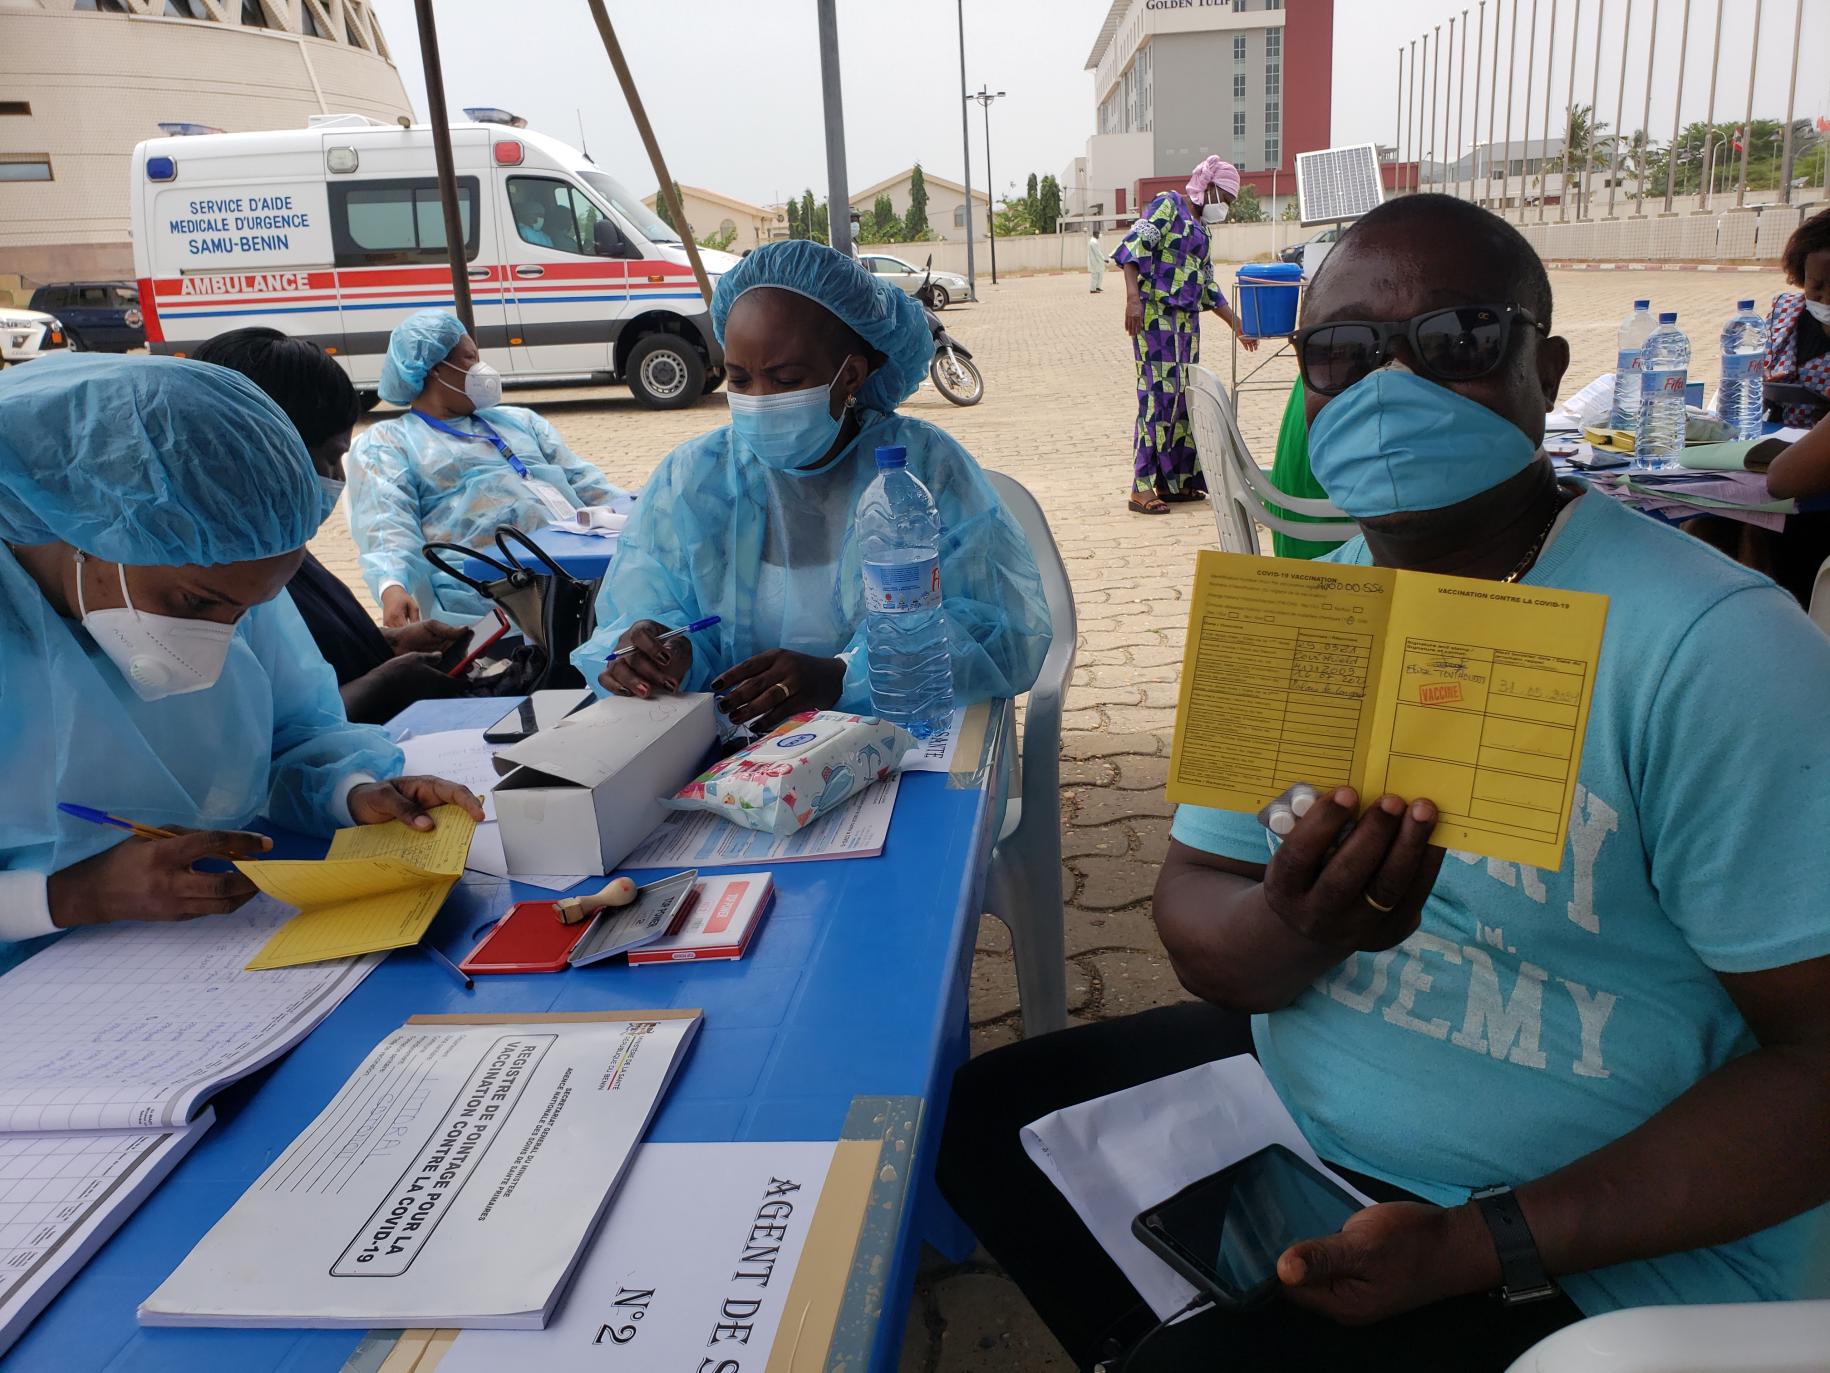 A man in sunglasses, a blue shirt, and a blue face mask shows his vaccination form to the camera while two health care workers sit near him.